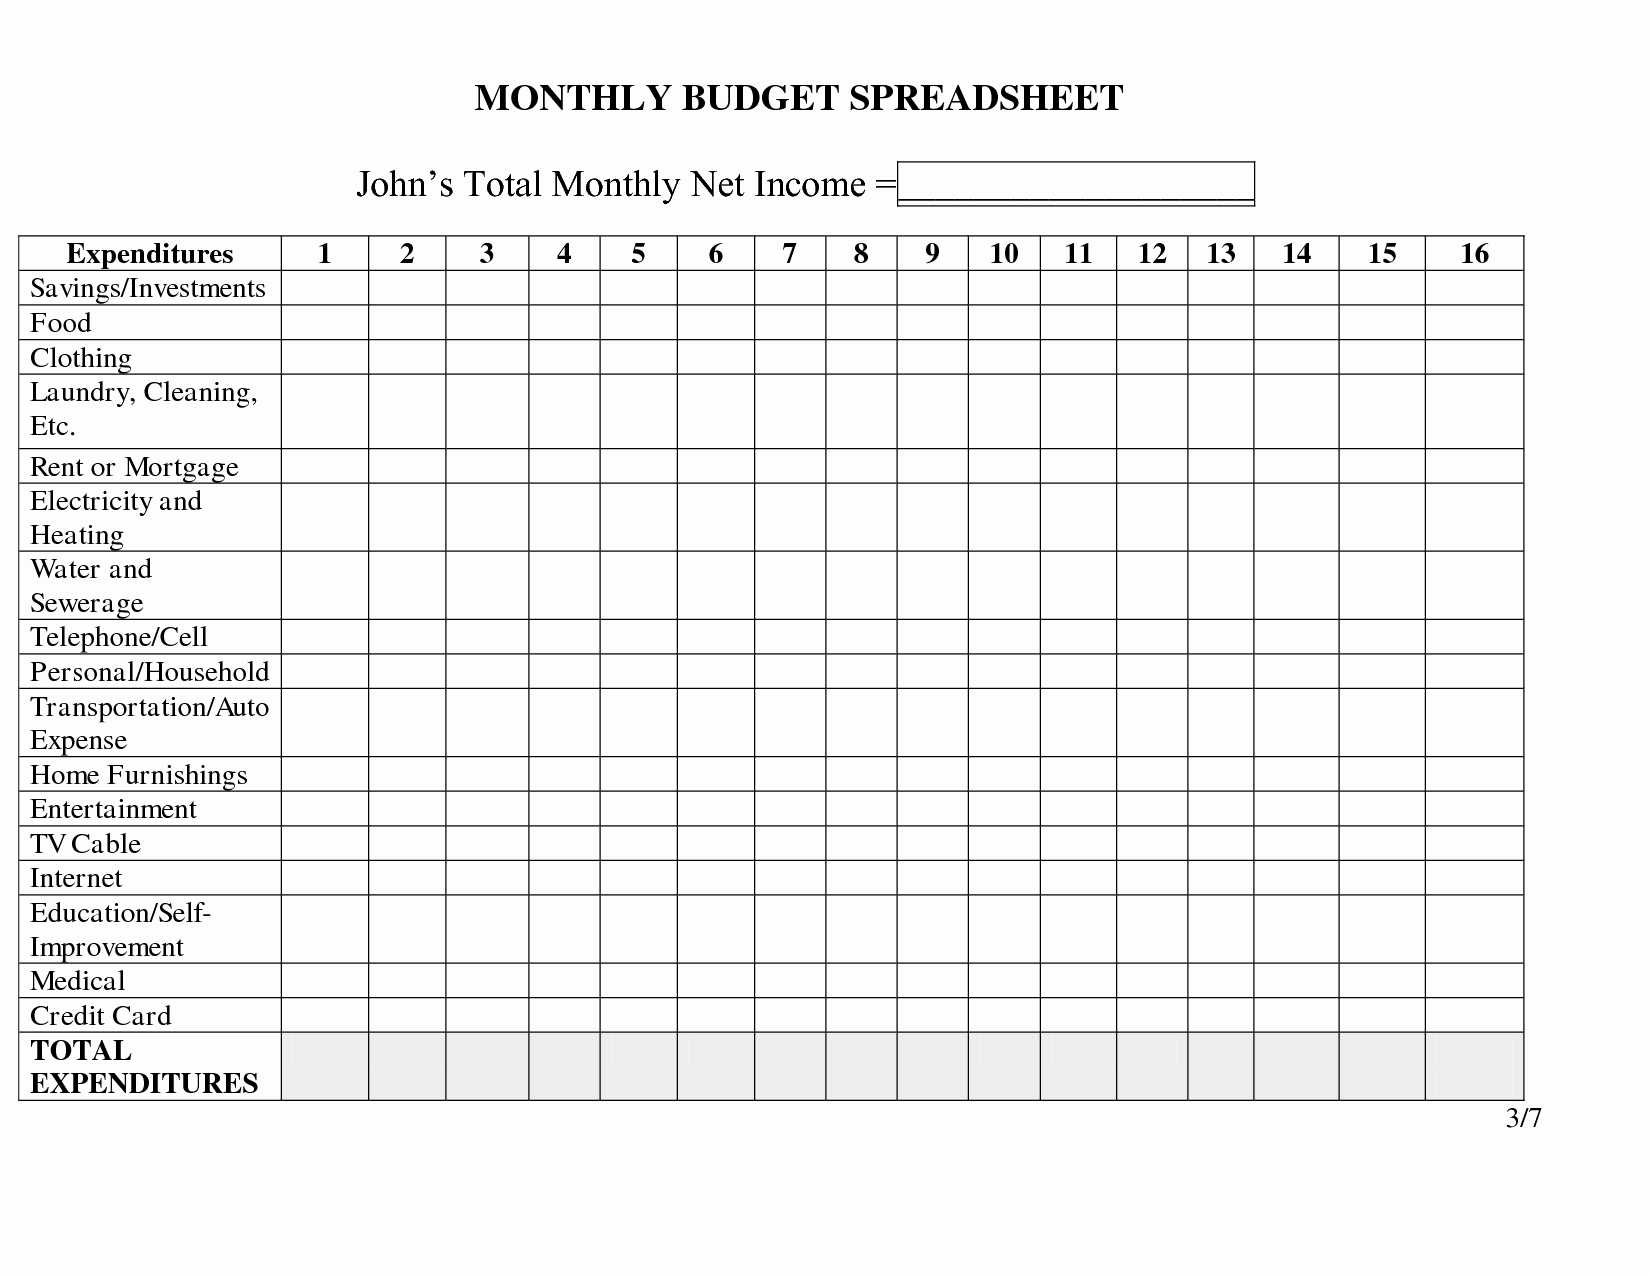 Best Budget Worksheet as Well as New Home Bud Spreadsheet Best Best S Monthly Bud